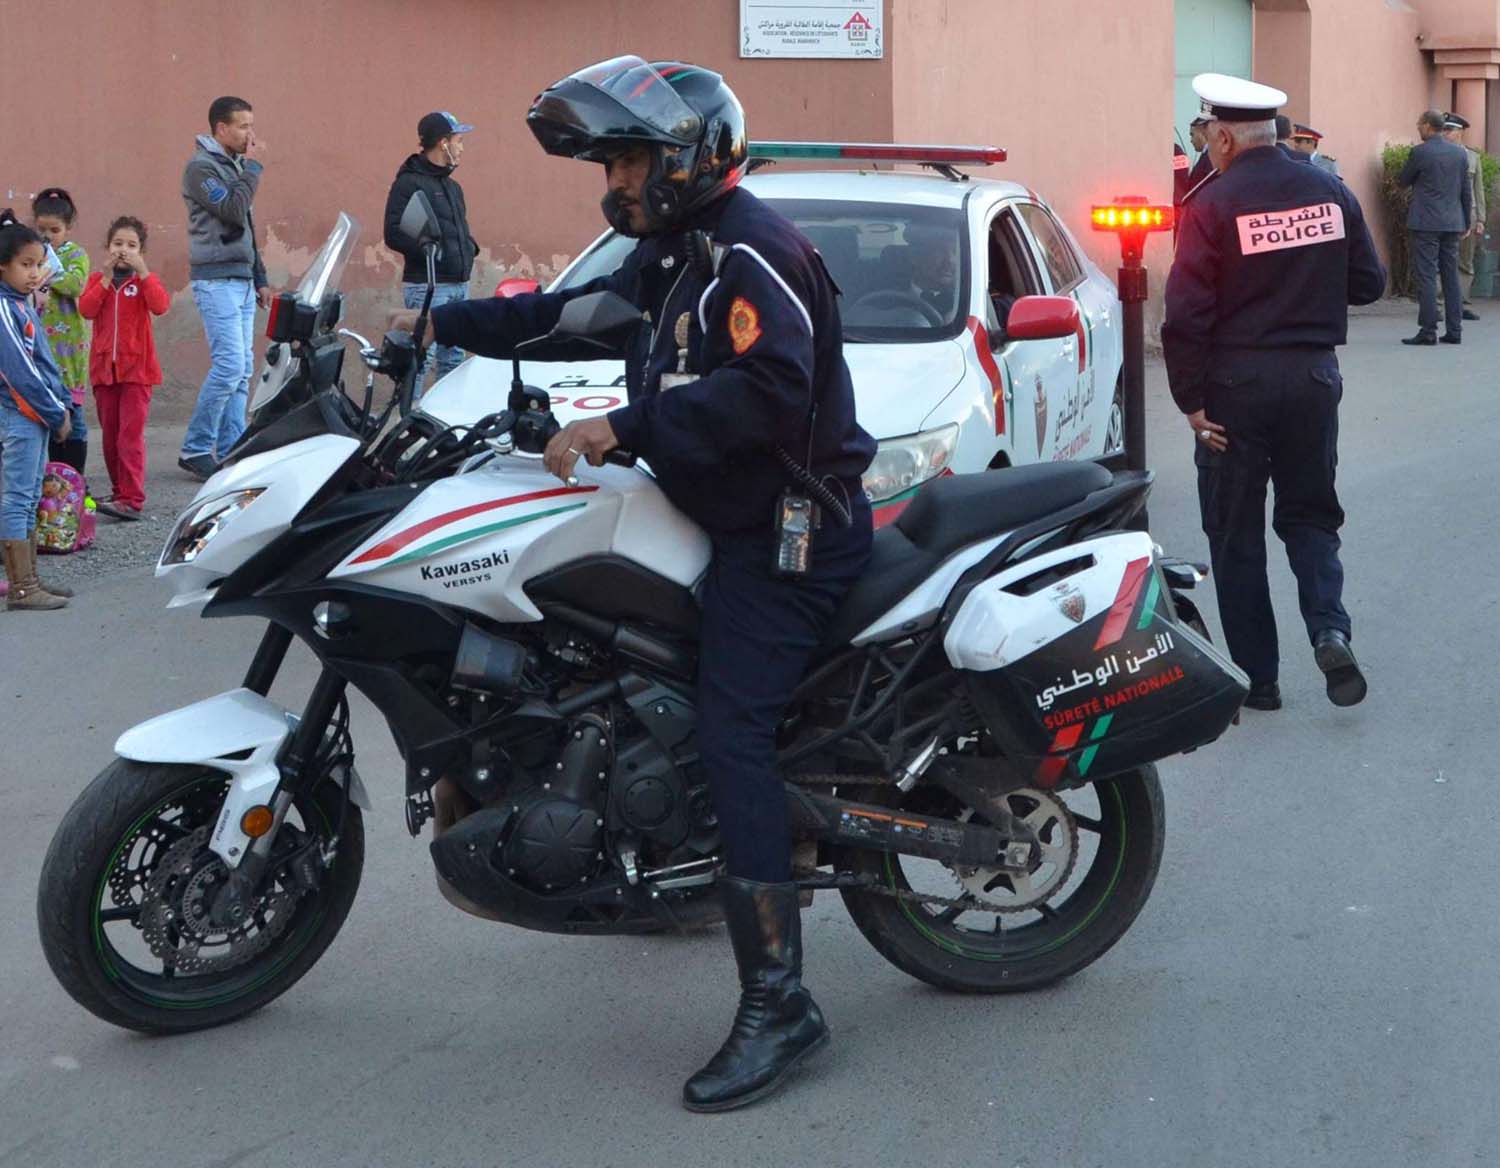 Moroccan police